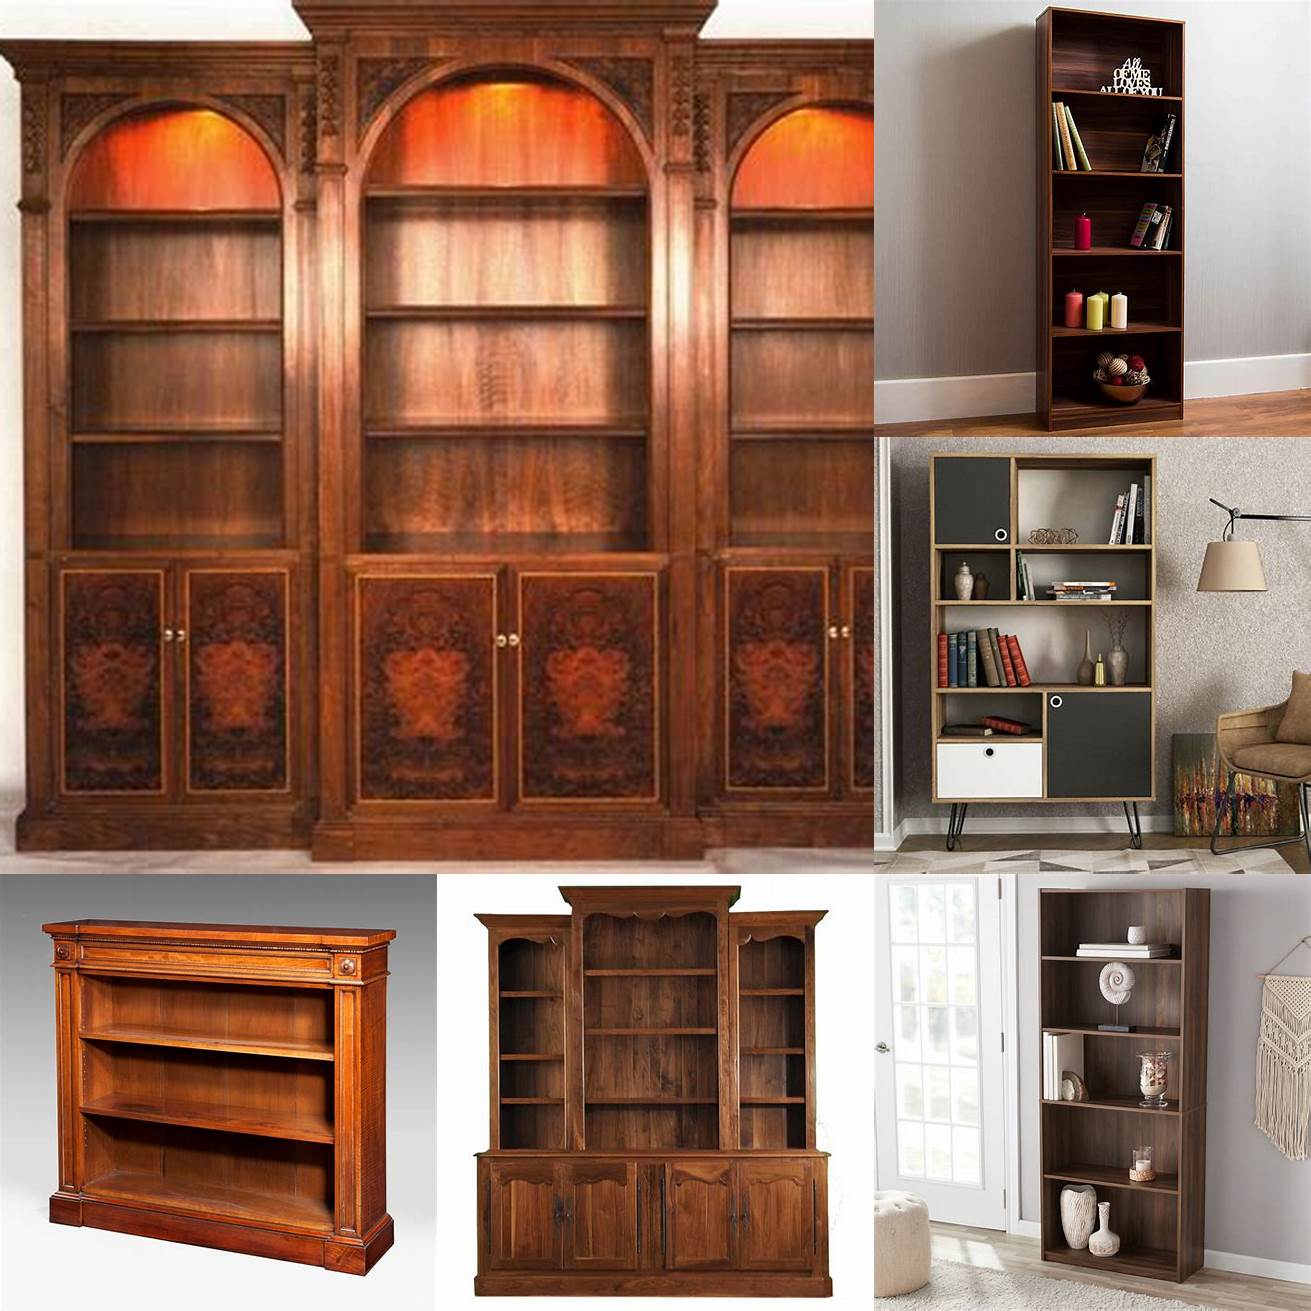 Image of a high-end walnut bookshelf with intricate details